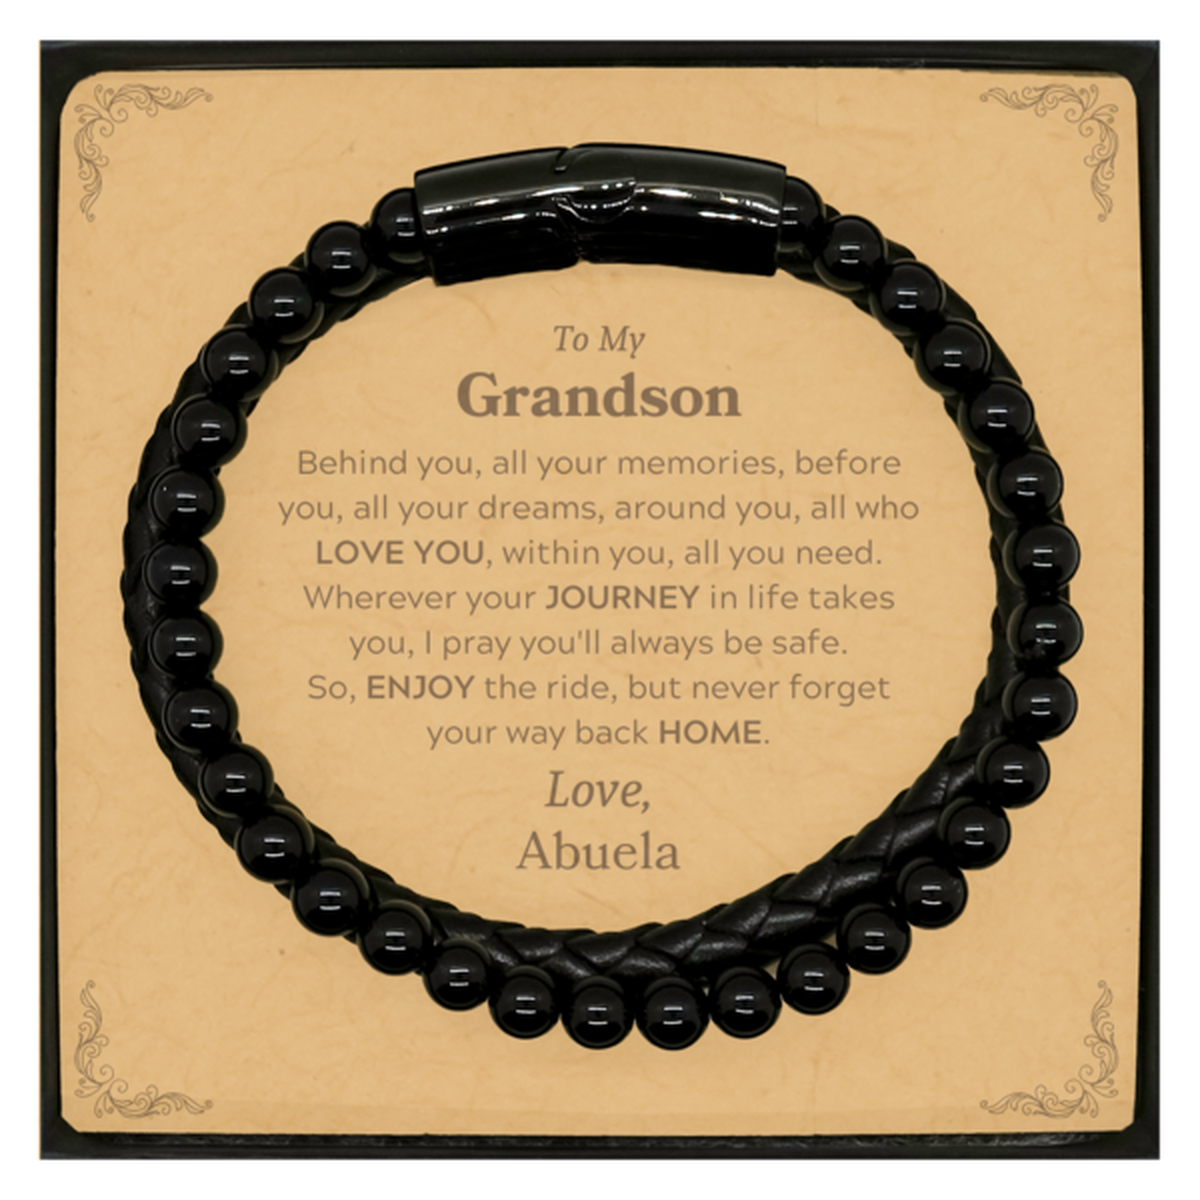 To My Grandson Graduation Gifts from Abuela, Grandson Stone Leather Bracelets Christmas Birthday Gifts for Grandson Behind you, all your memories, before you, all your dreams. Love, Abuela